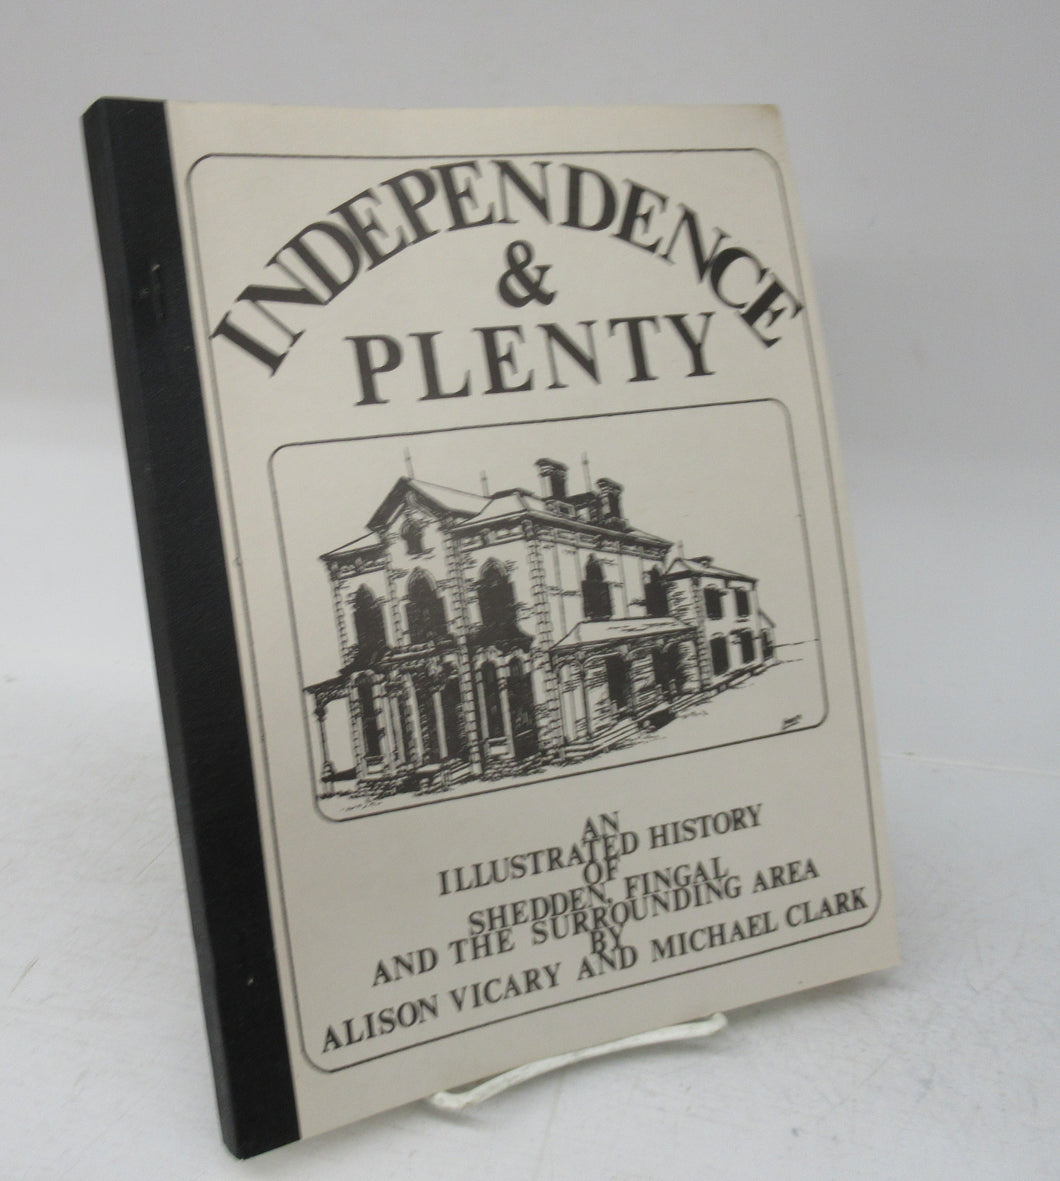 Independence & Plenty: An Illustrated History of Shedden, Fingal and the Surrounding Area